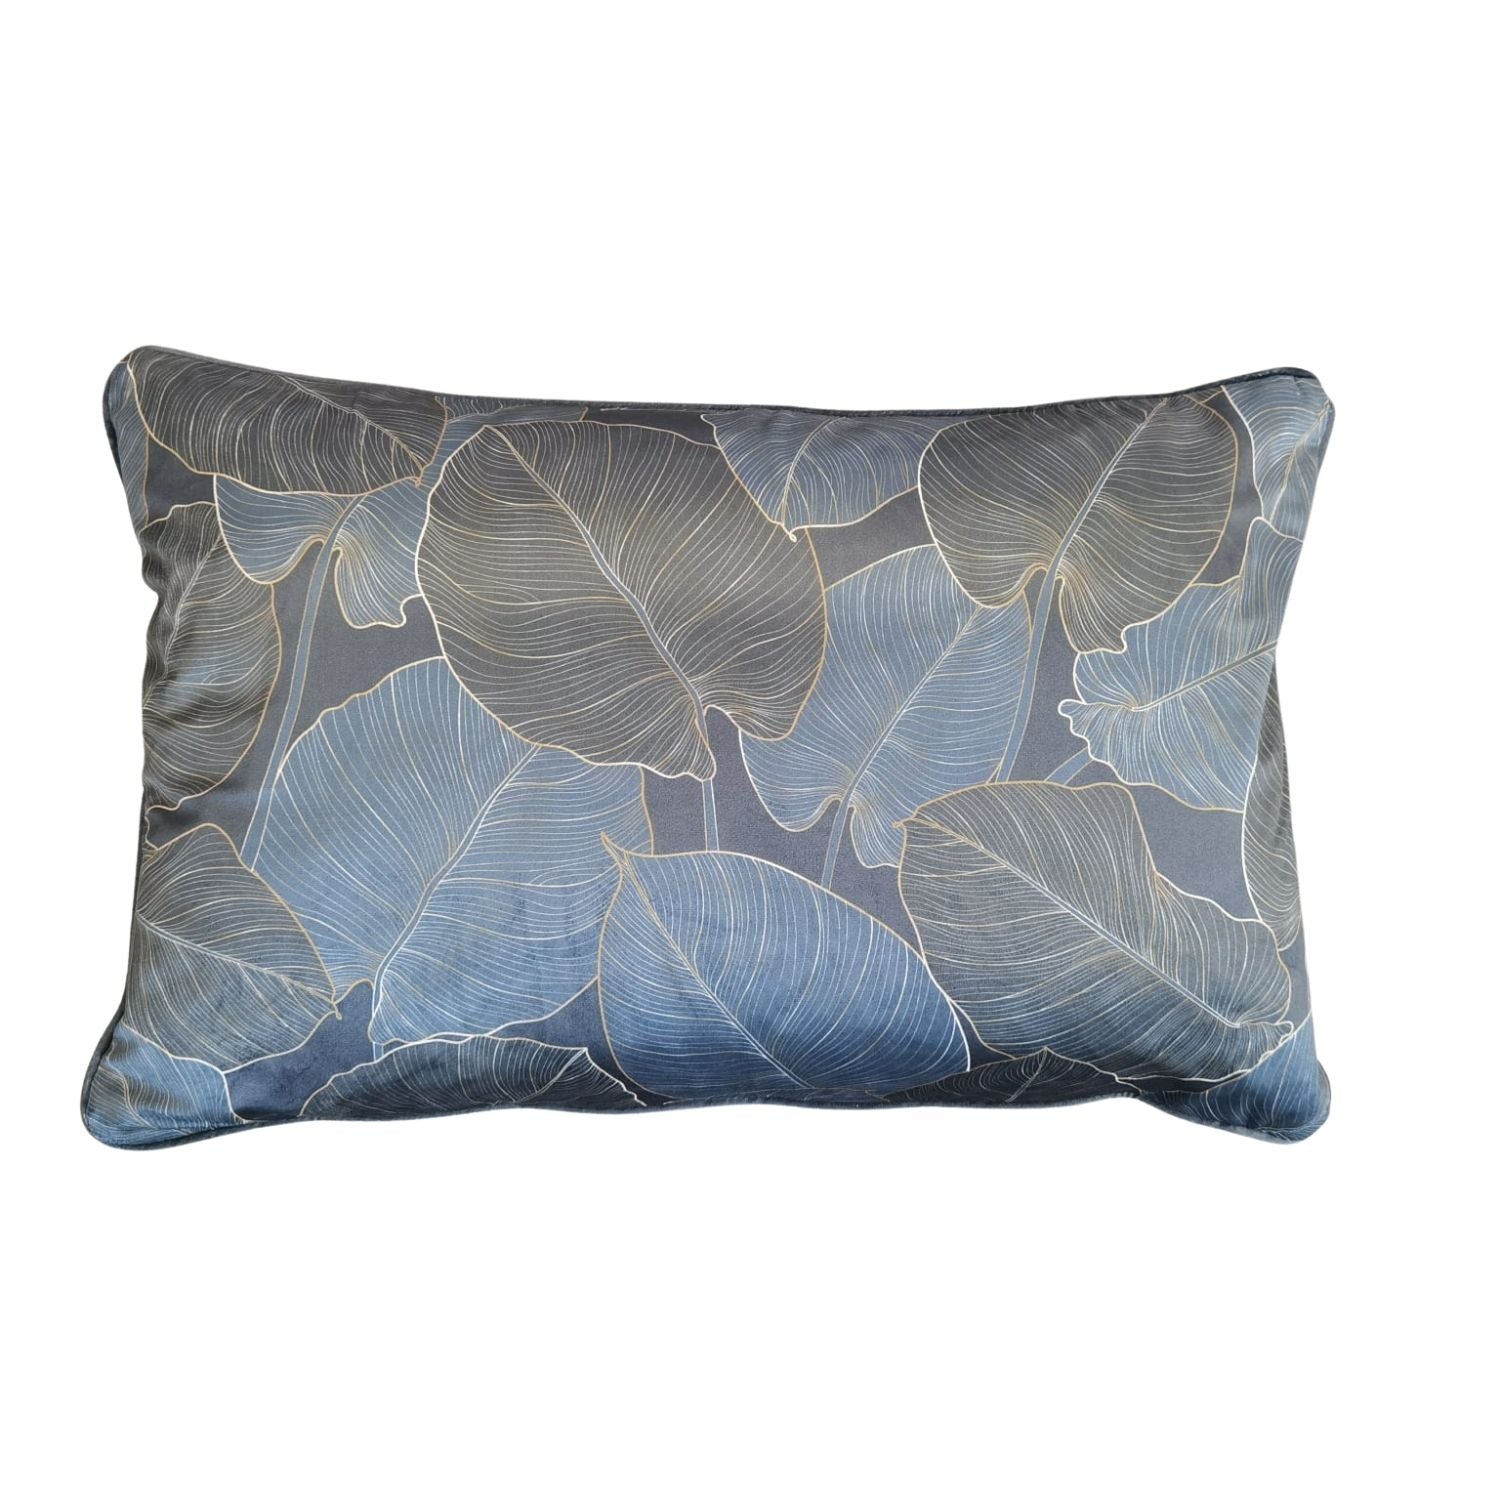 The Home Living Room Printed Piped Cushion - Blue &amp; Cream 1 Shaws Department Stores